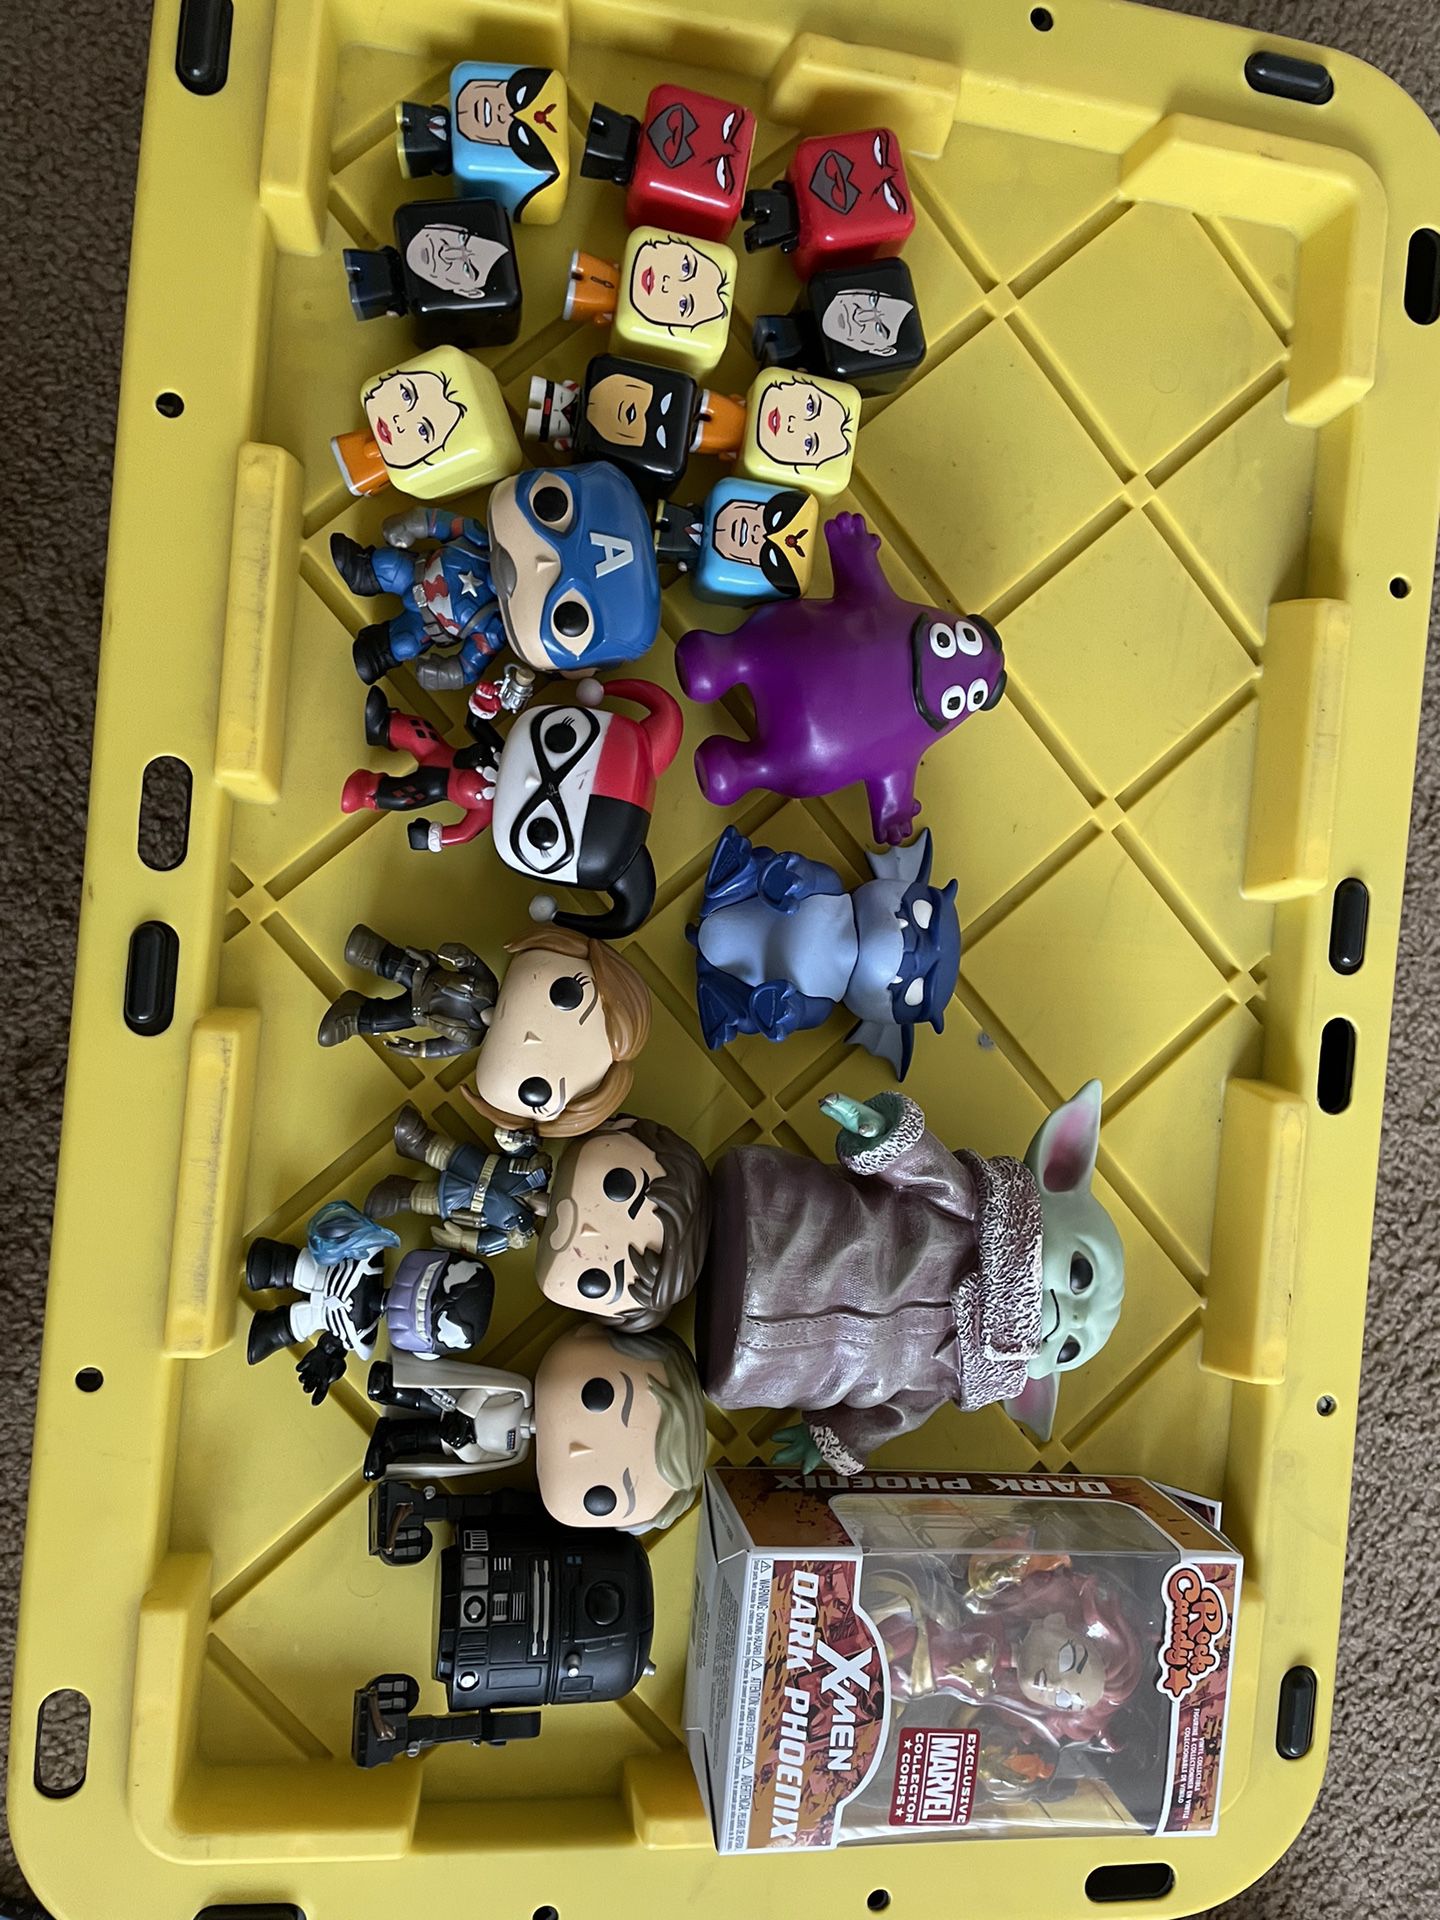 Funkos And Other Collectibles